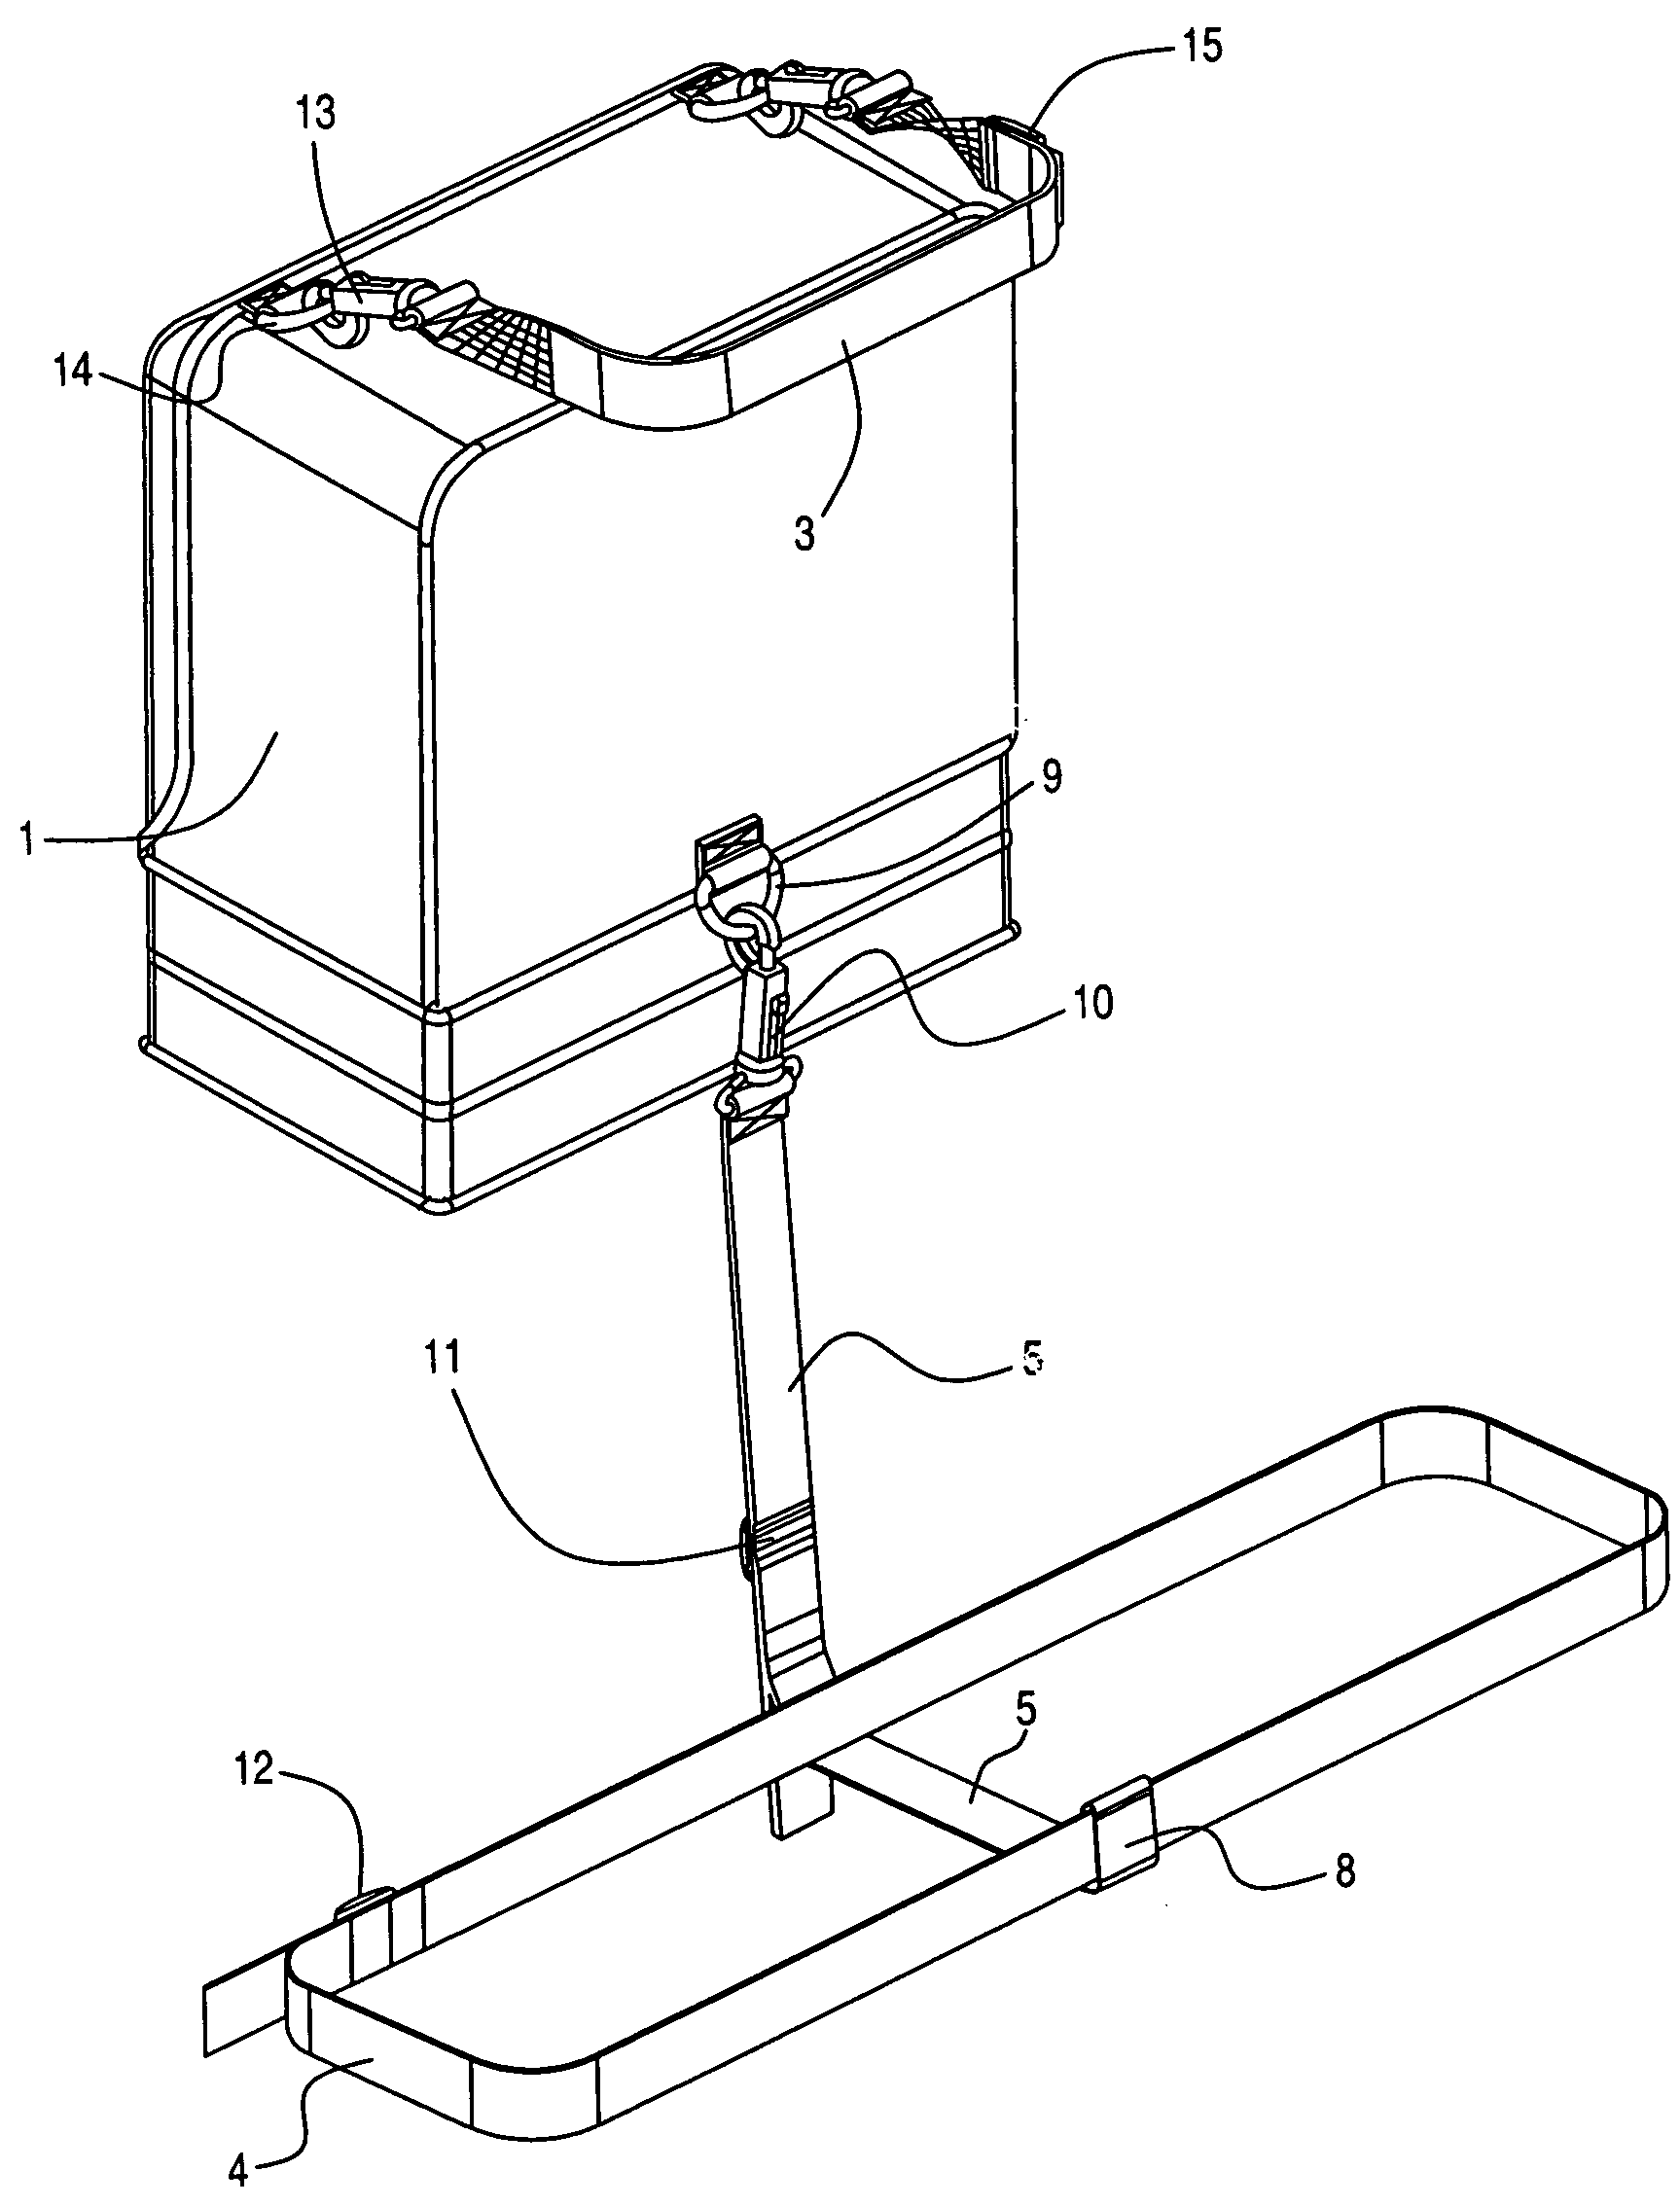 Mounting system for audio visual equipment